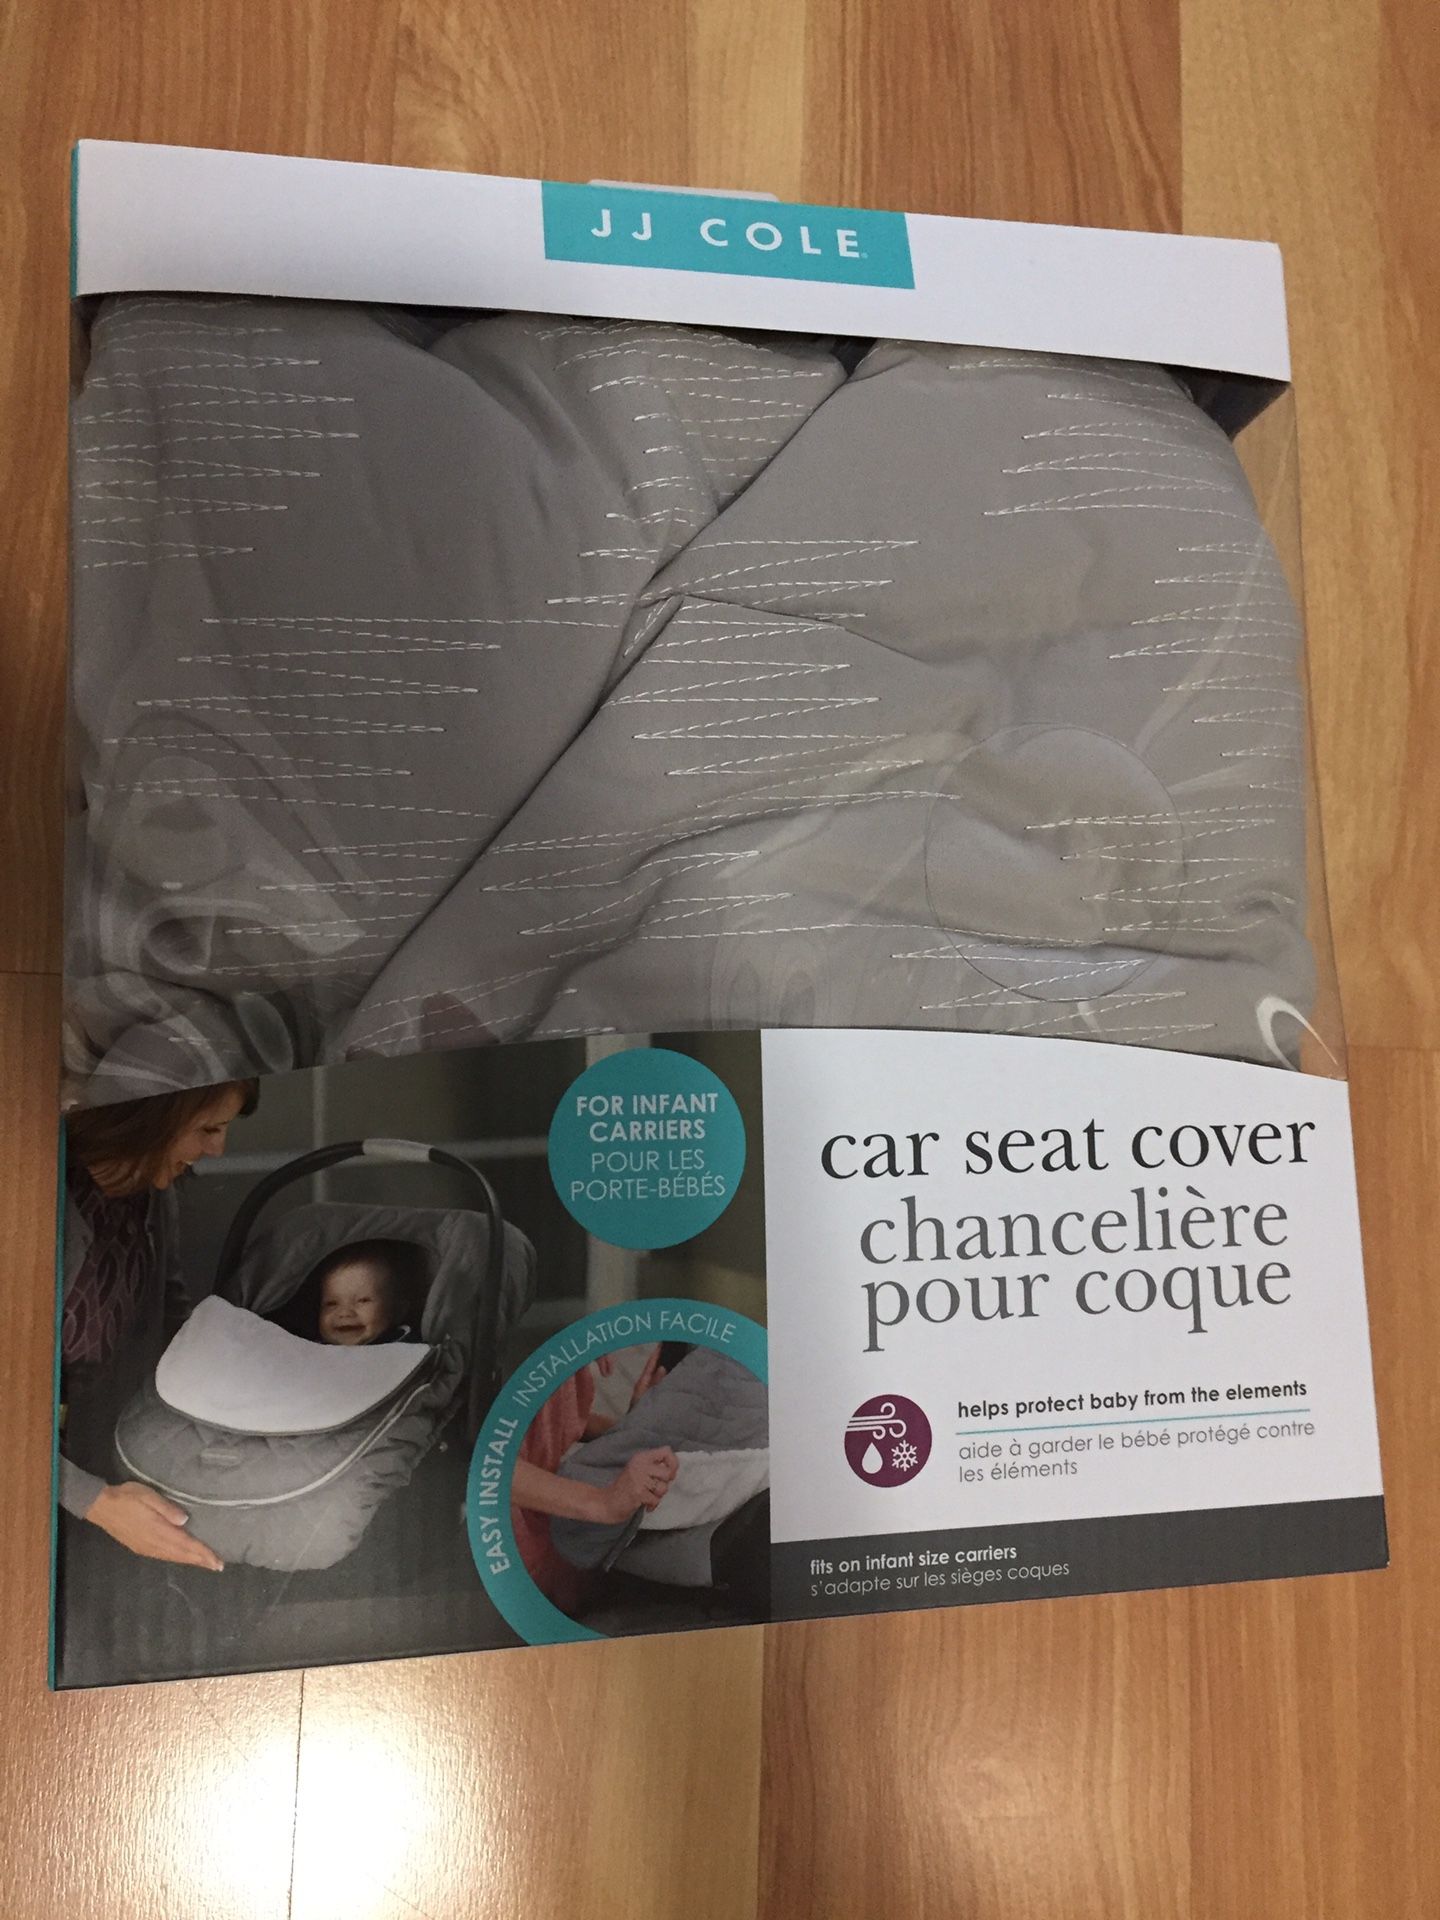 CAR SEAT COVER JJ COLE BRAND NEW $10